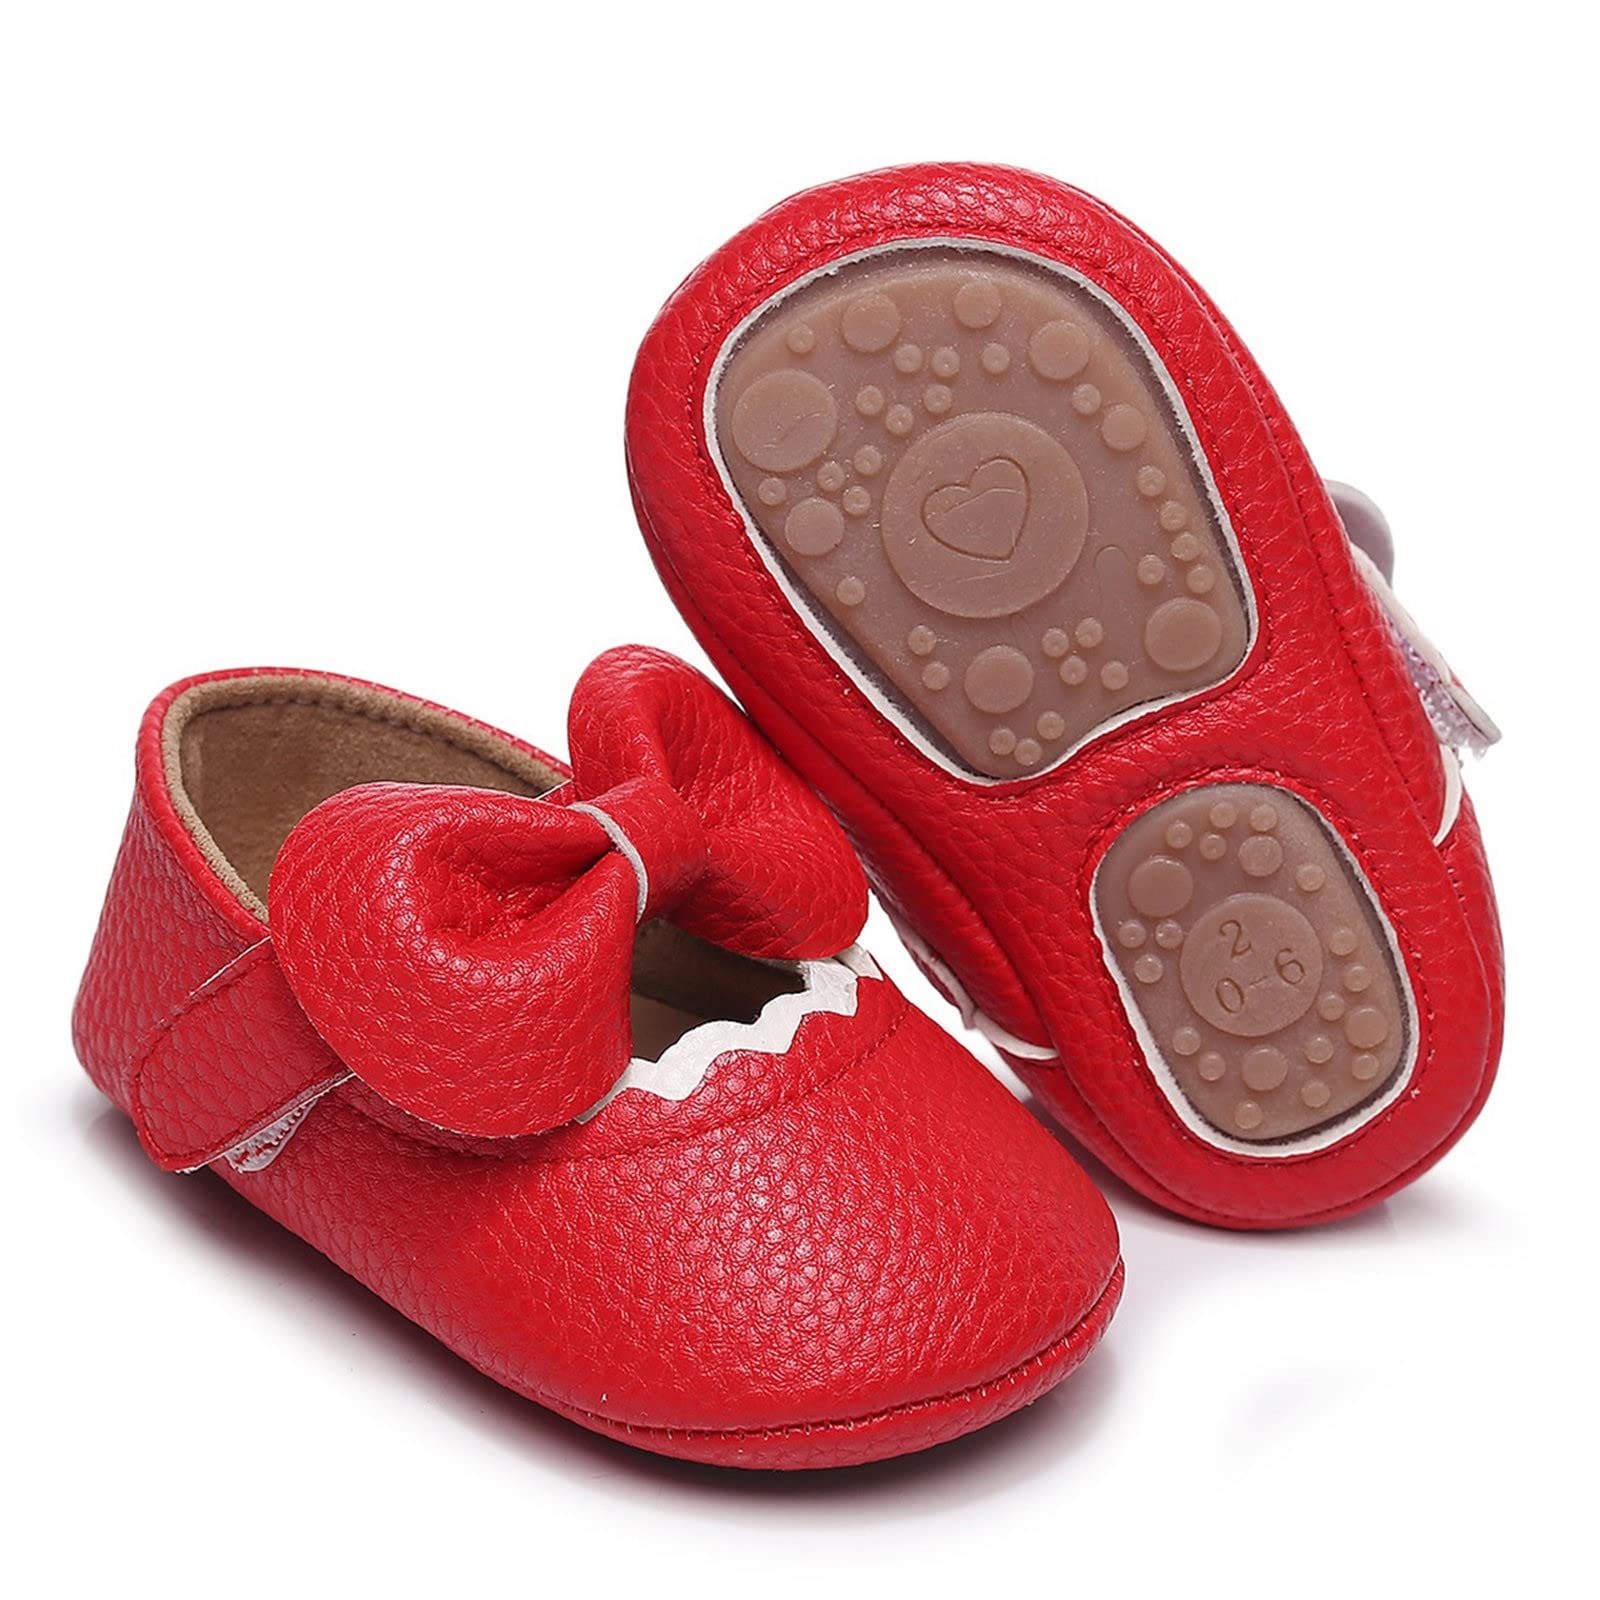 Toddler Boy Boots 24 Months Infant Girls Single Shoes Ruffles Bowknot First Walkers Shoes Shoes Toddlers Girls